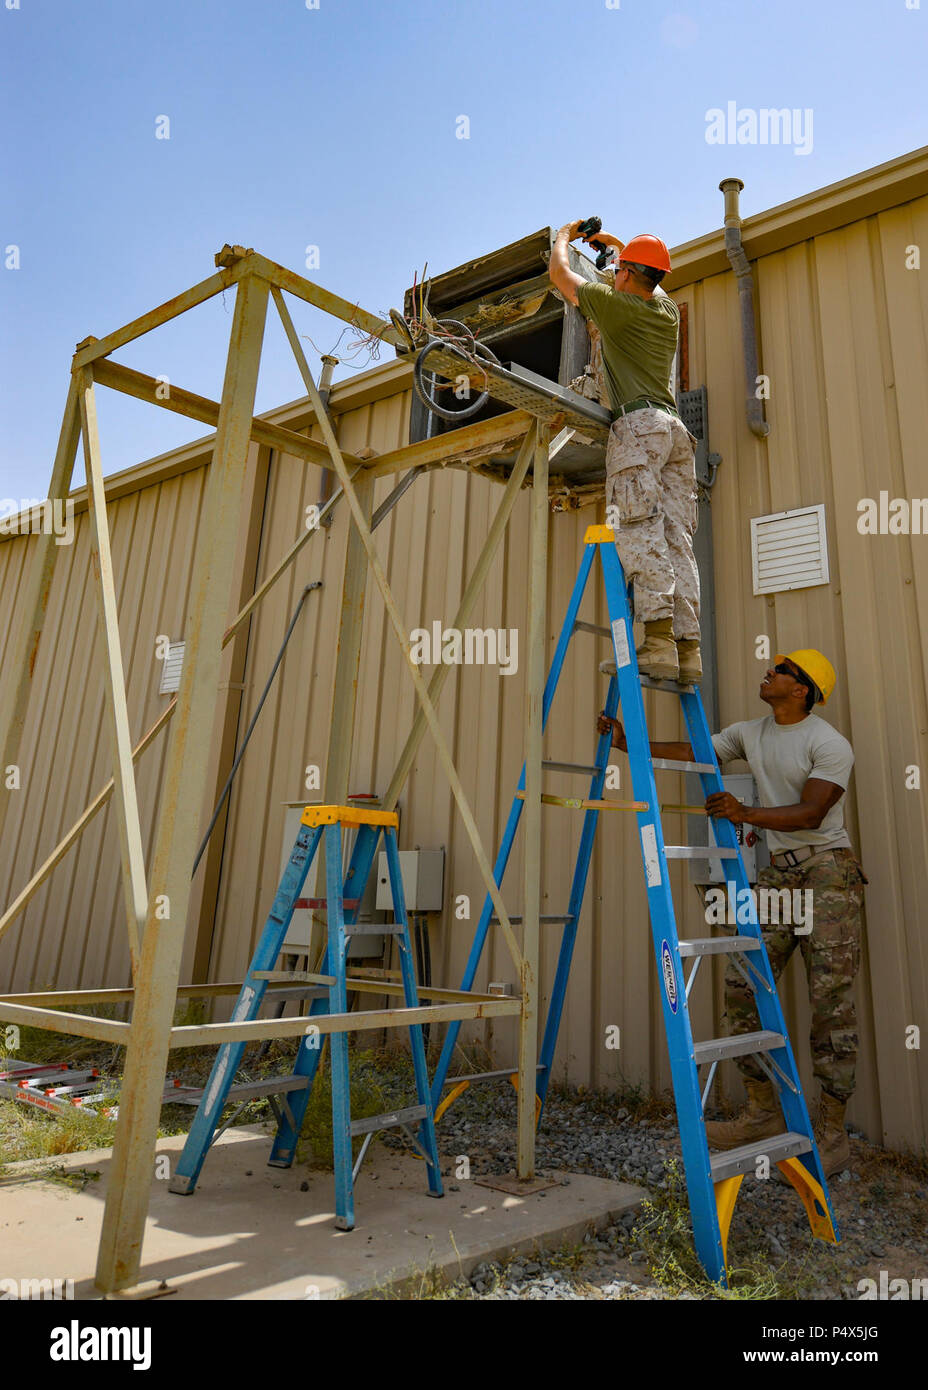 Marine Corps Sgt. Jospeh Spore, a welder with Marine Wing Support Squadron 372, top, prepares an air duct opening for the installation of a new industrial air conditioning unit while Staff Sgt. Hassan Mateyka, an HVAC technician with the 407th Expeditionary Civil Engineer Squadron, secures the ladder May 4, 2017, in Southwest Asia. Expeditionary Marines with MWSS 372 support the Group Special Purpose Marine Air-Ground Task Force-Crisis Response-Central Command, which is collocated with the 470th Air Expeditionary Group. Marines and Airmen frequently partner to sharpen joint skillsets and compl Stock Photo